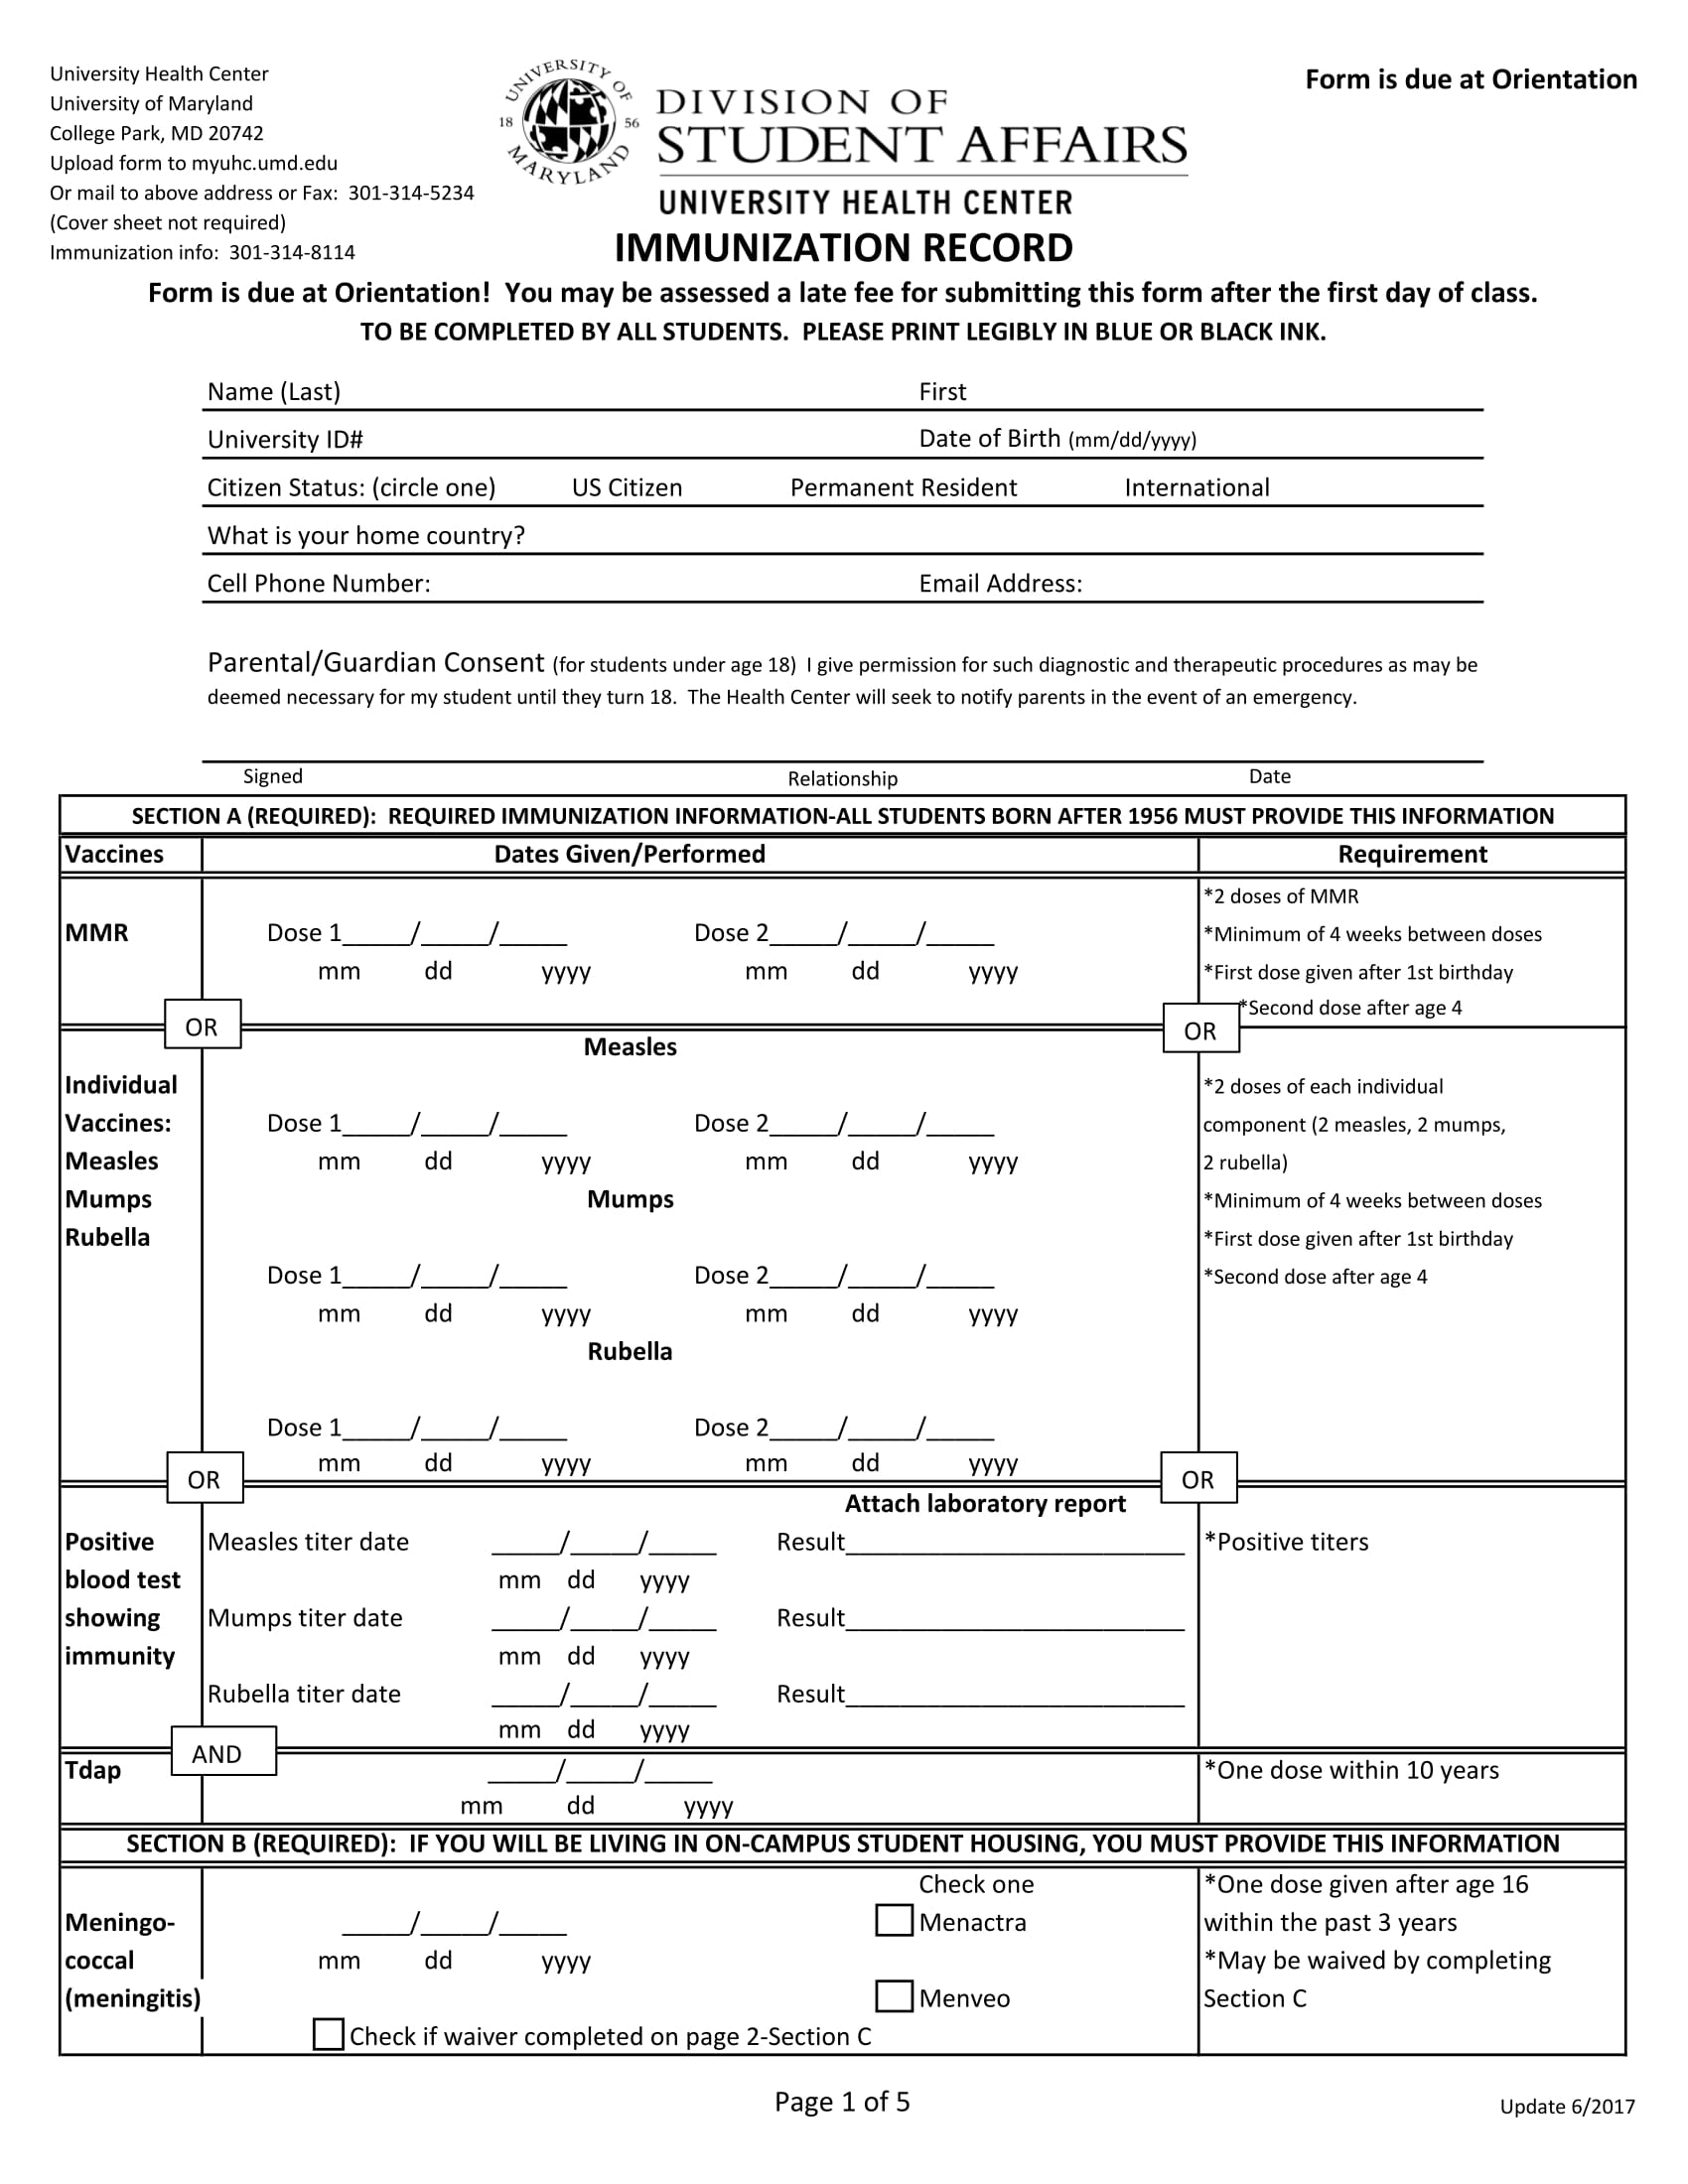 immunization record review form 1